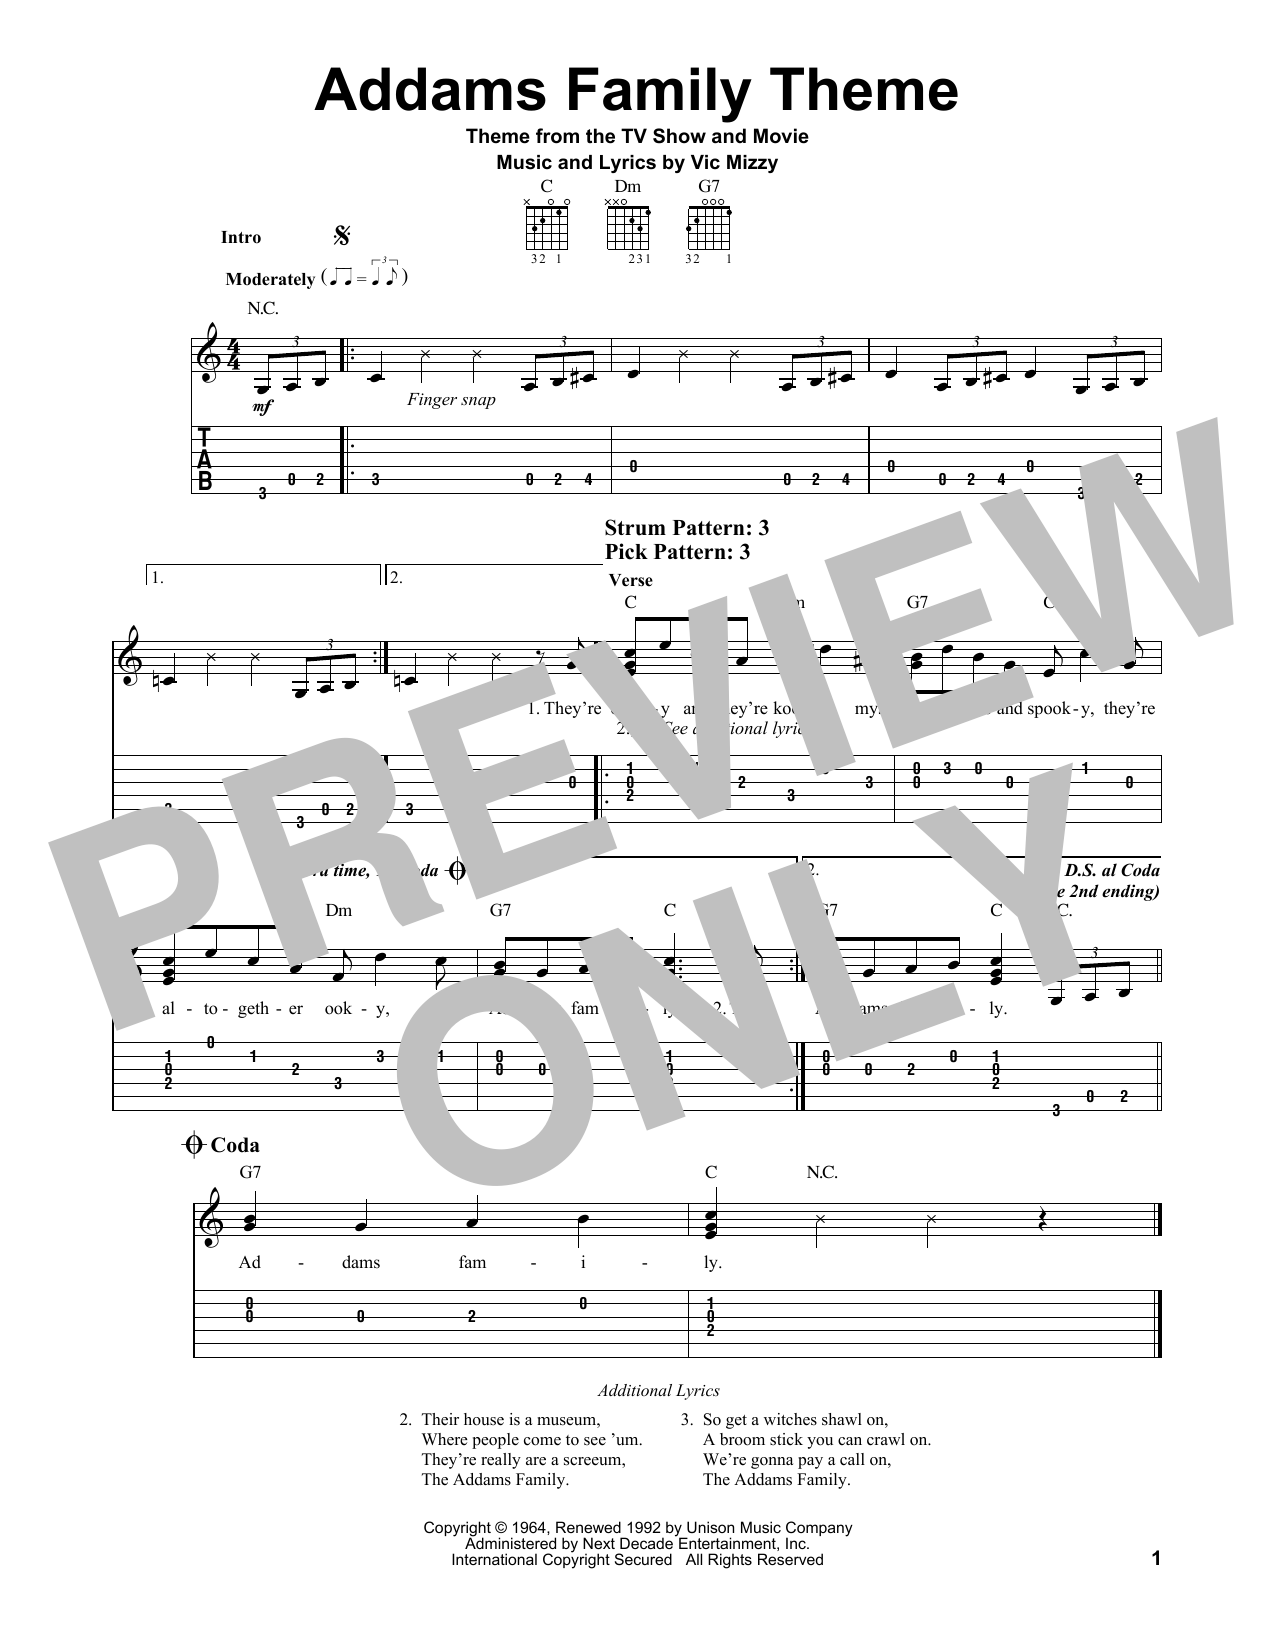 Download Vic Mizzy The Addams Family Theme Sheet Music